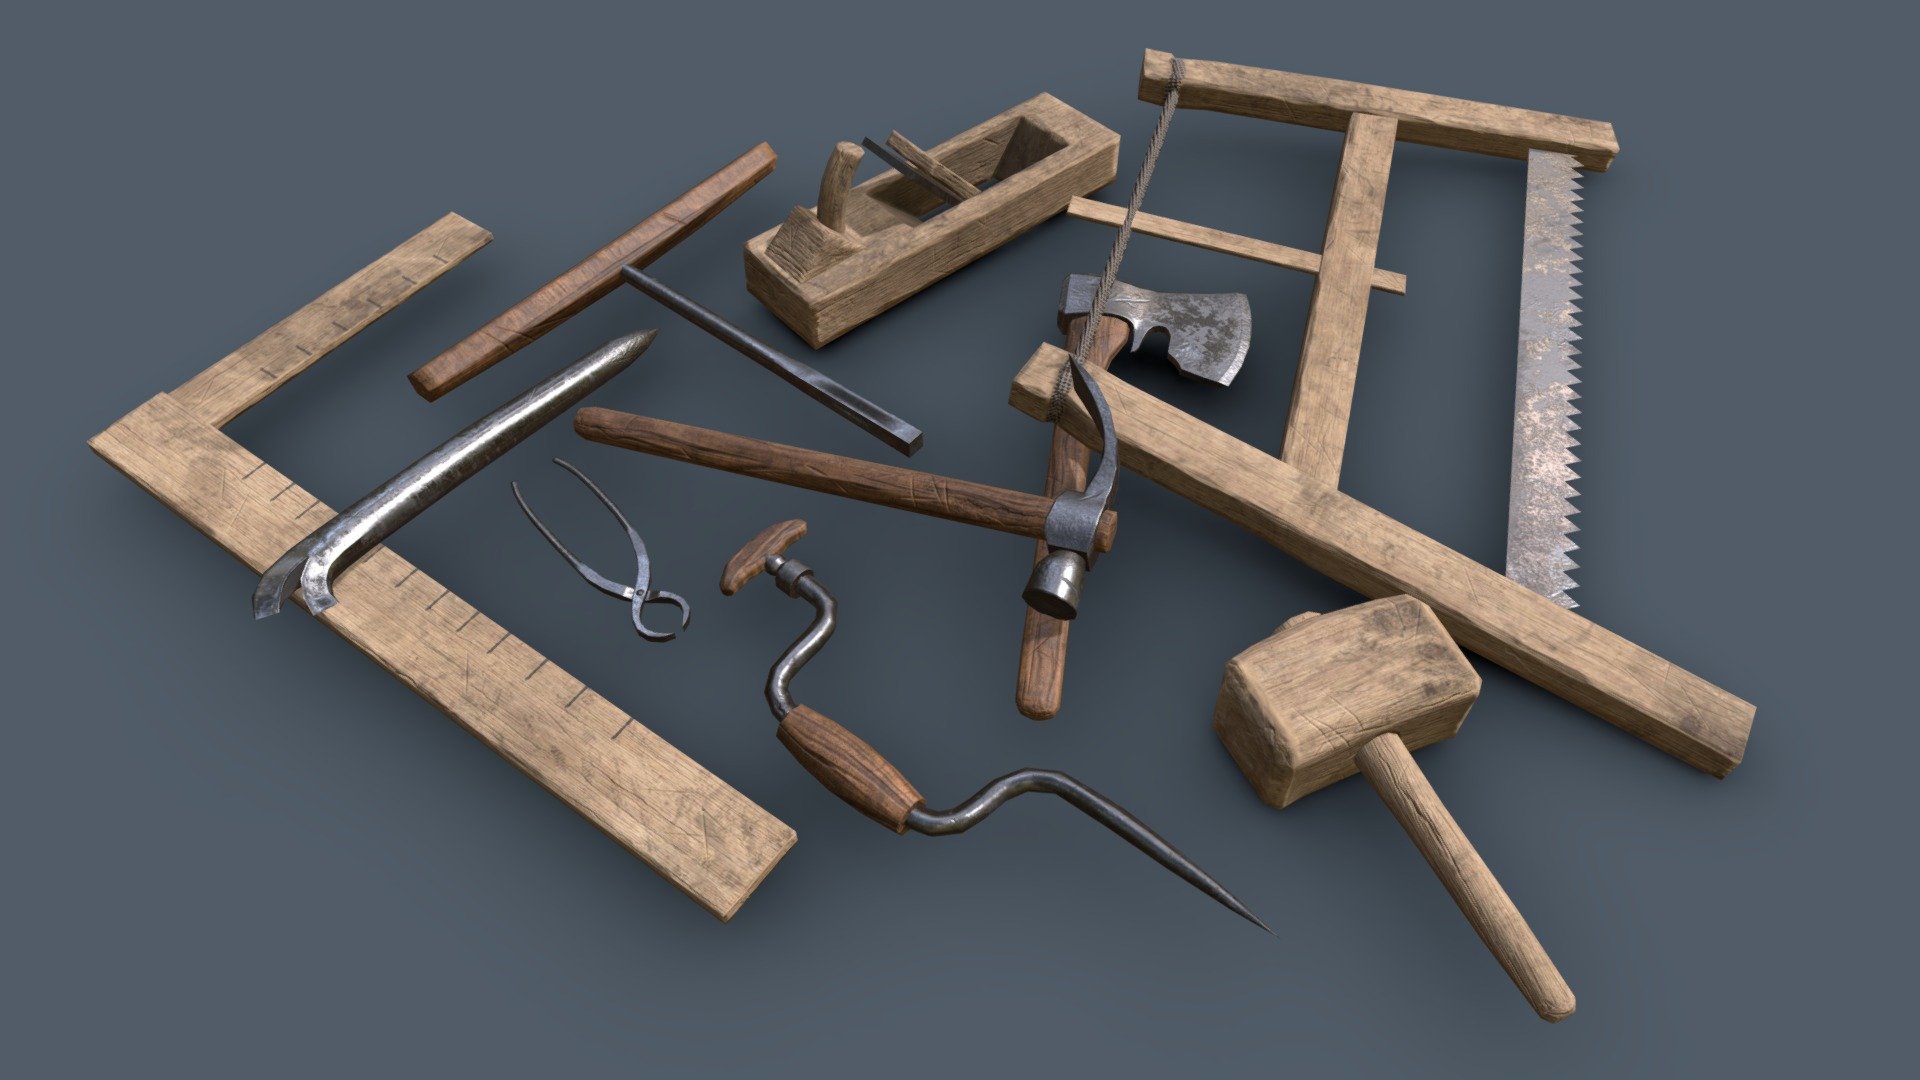 Carpentry Tools
This is part of a Carpentry Station set.




Optimized 3D models ready for use in video games and other projects.

10 tools.

Contains 5 textures that make up a single material.

A separate set of chisels on my profile (free).

contains .blend file

For specific questions, feel free to comment or contact me through email available on my profile 😀

For more 3D models check my profile! 

  Don't forget to like and follow :) - Carpentry Tools - Buy Royalty Free 3D model by Mikołaj Michalak (@M_Michalak) 3d model